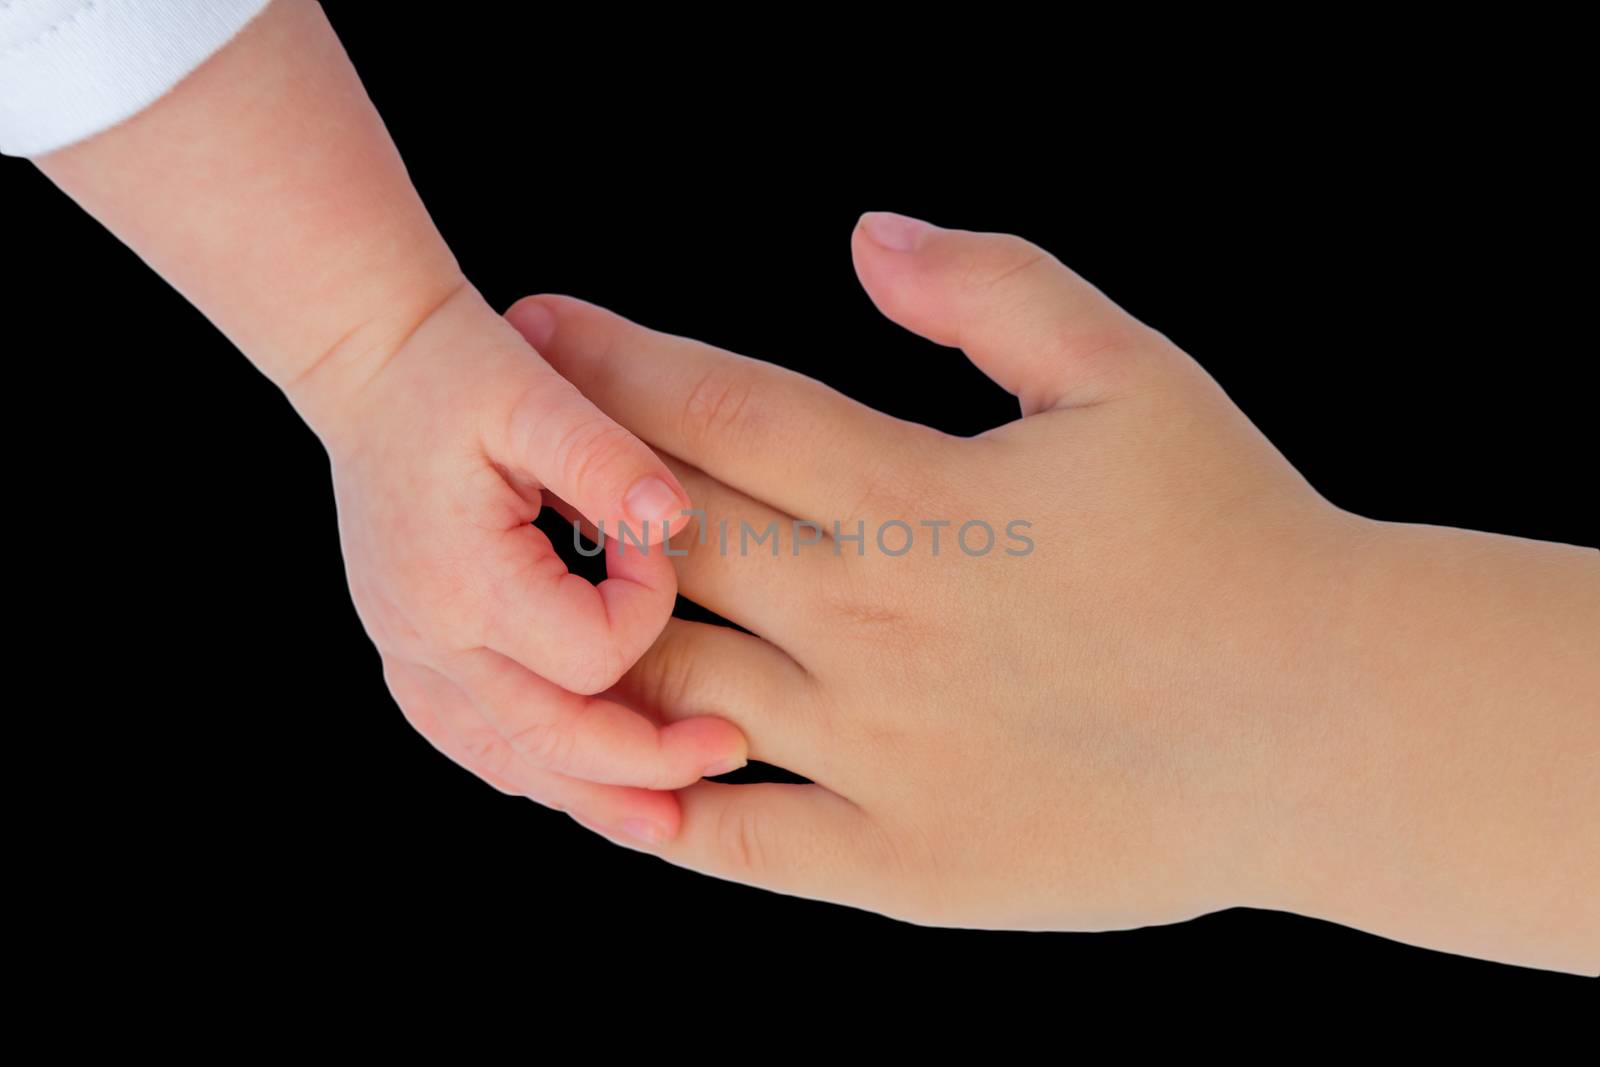 Hand of baby touching hand of child by BenSchonewille